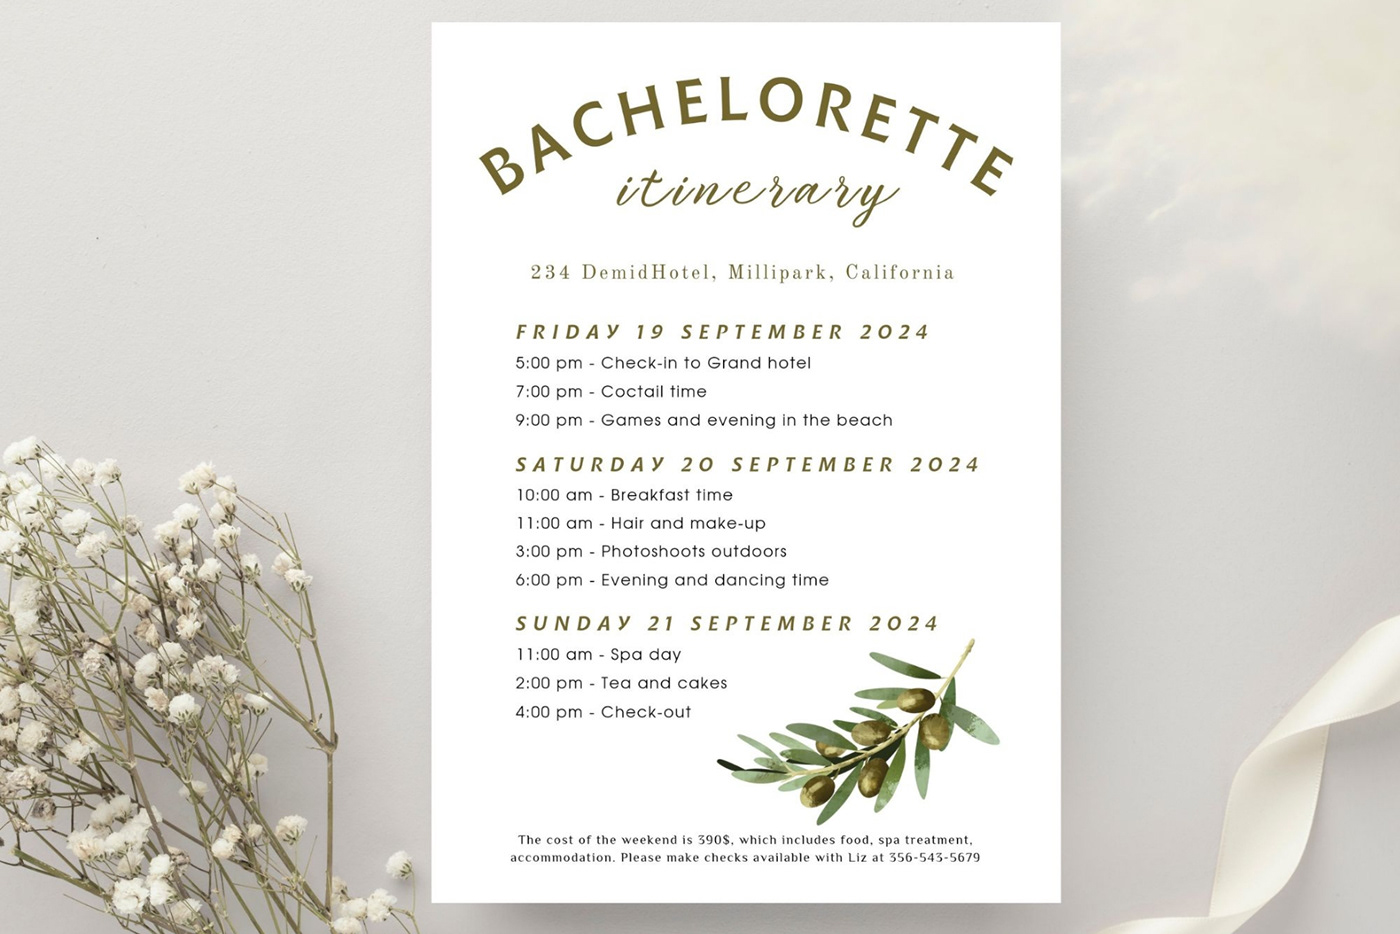 bachelorette party itinerary schedule card templates canvas bridal shower Invitation Bachelorette invitation Bachelorette itinerary